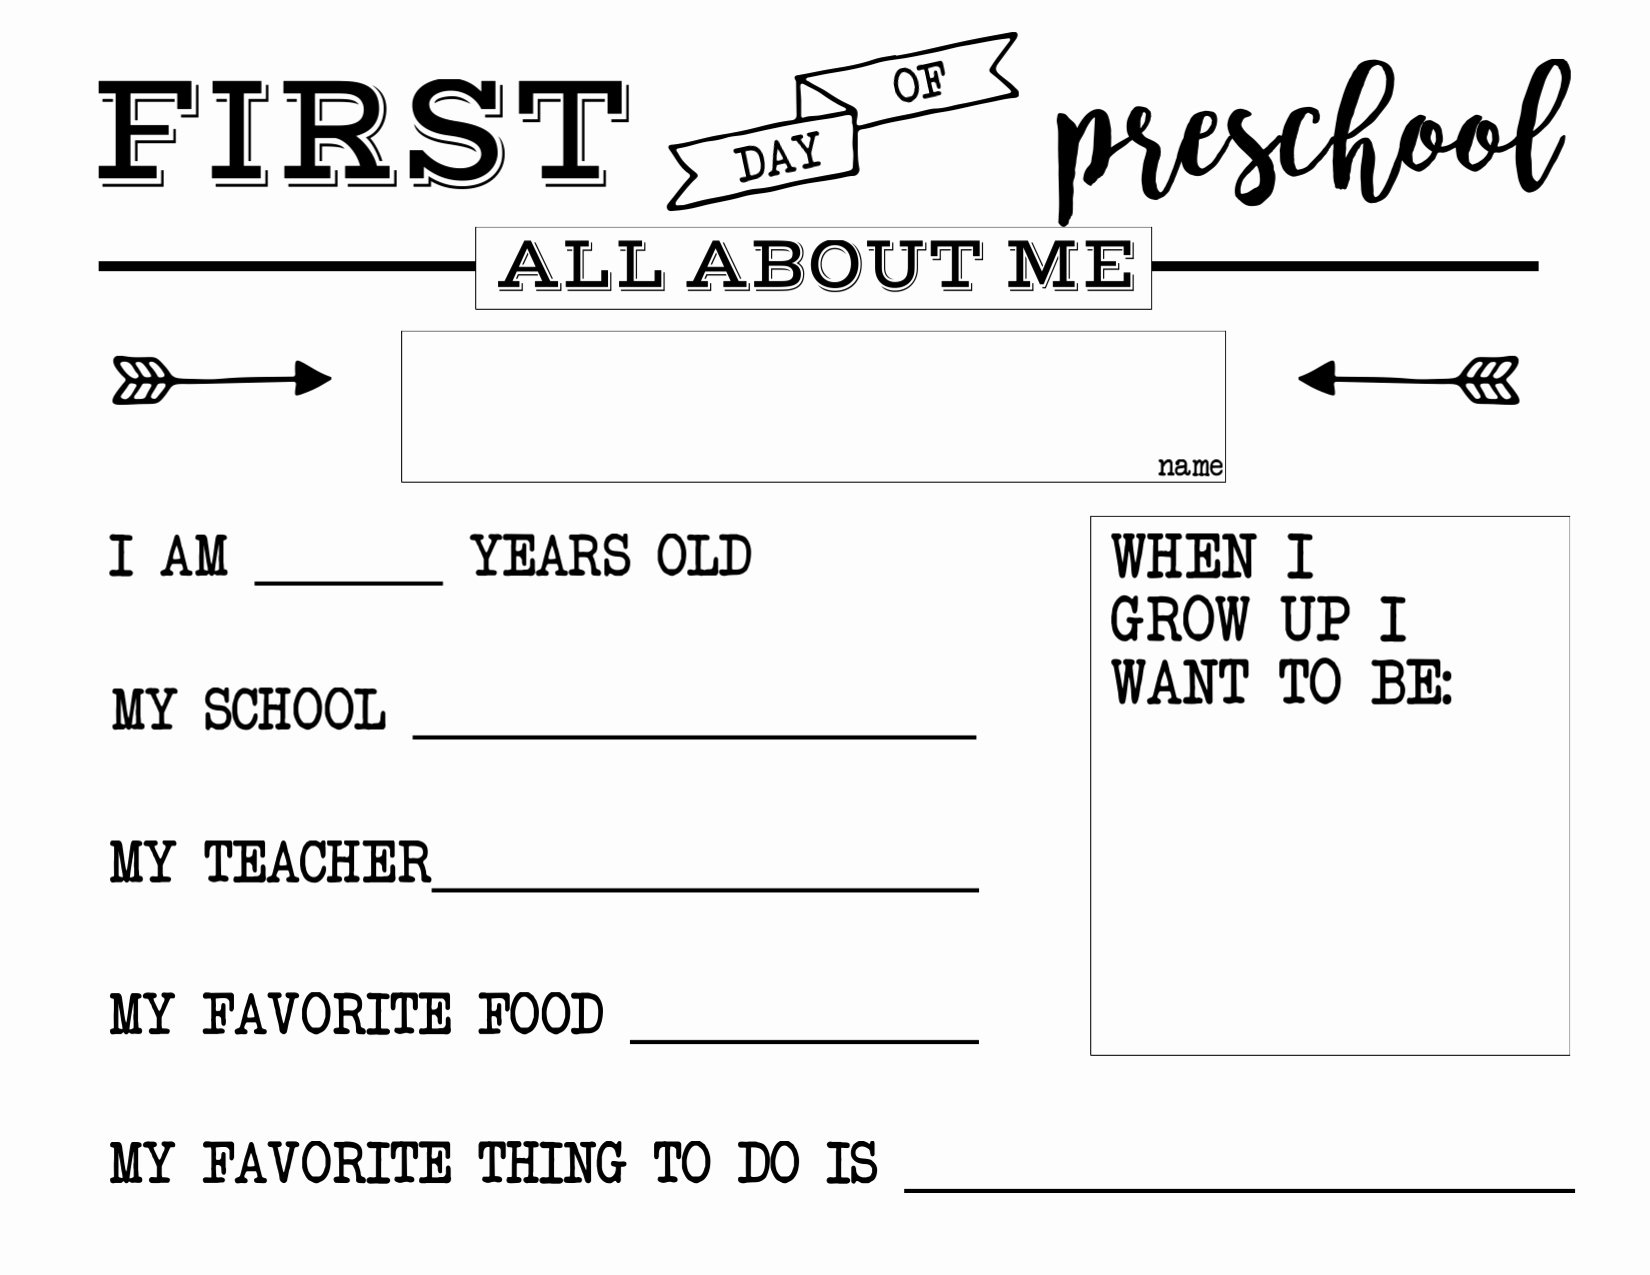 All About Me Worksheet Preschool Beautiful First Day Of School All About Me Sign Paper Trail Design